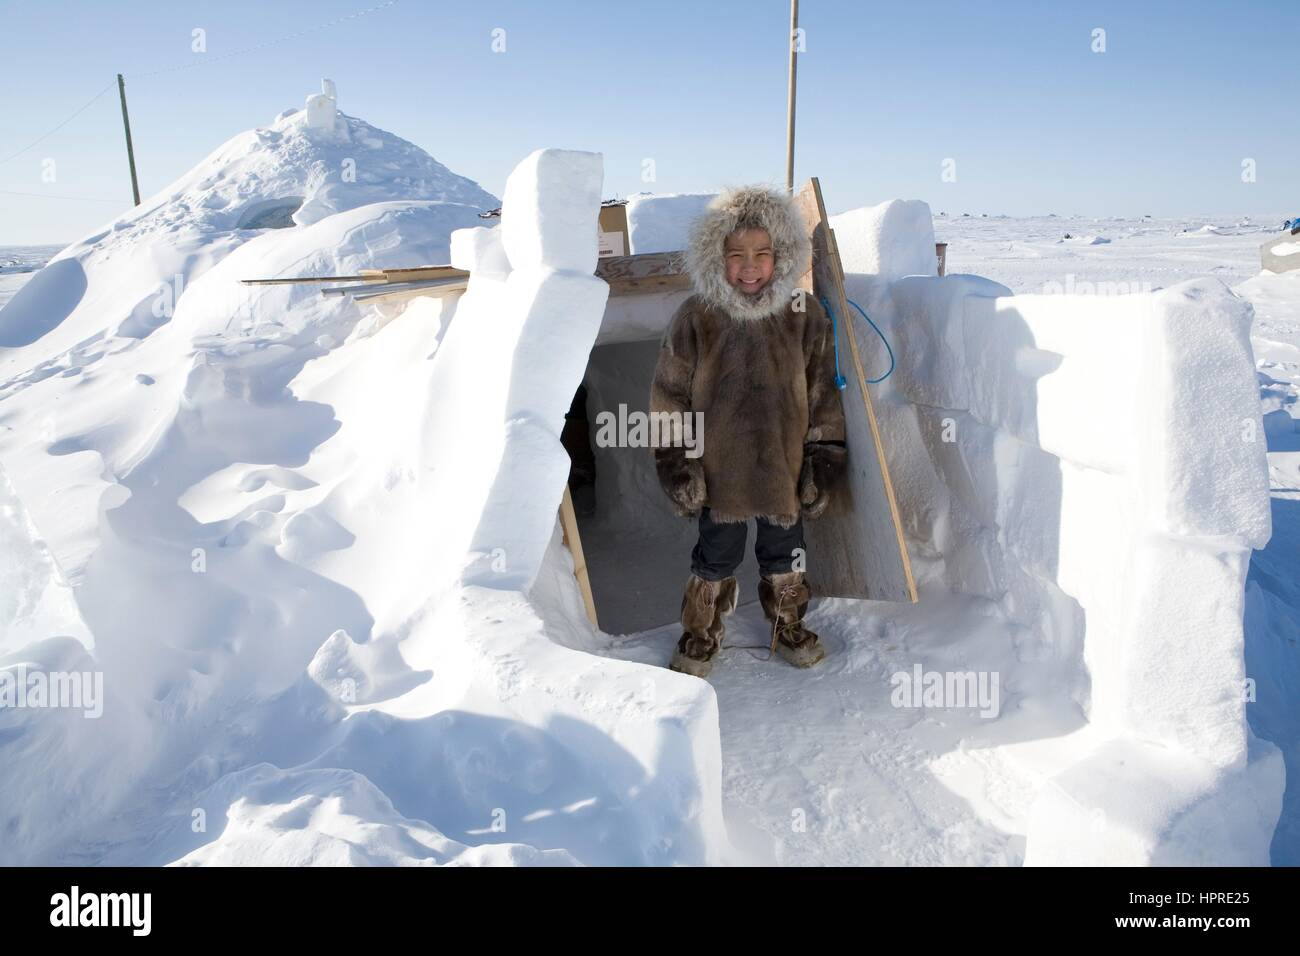 Inuit Igloo High Resolution Stock Photography and Images - Alamy